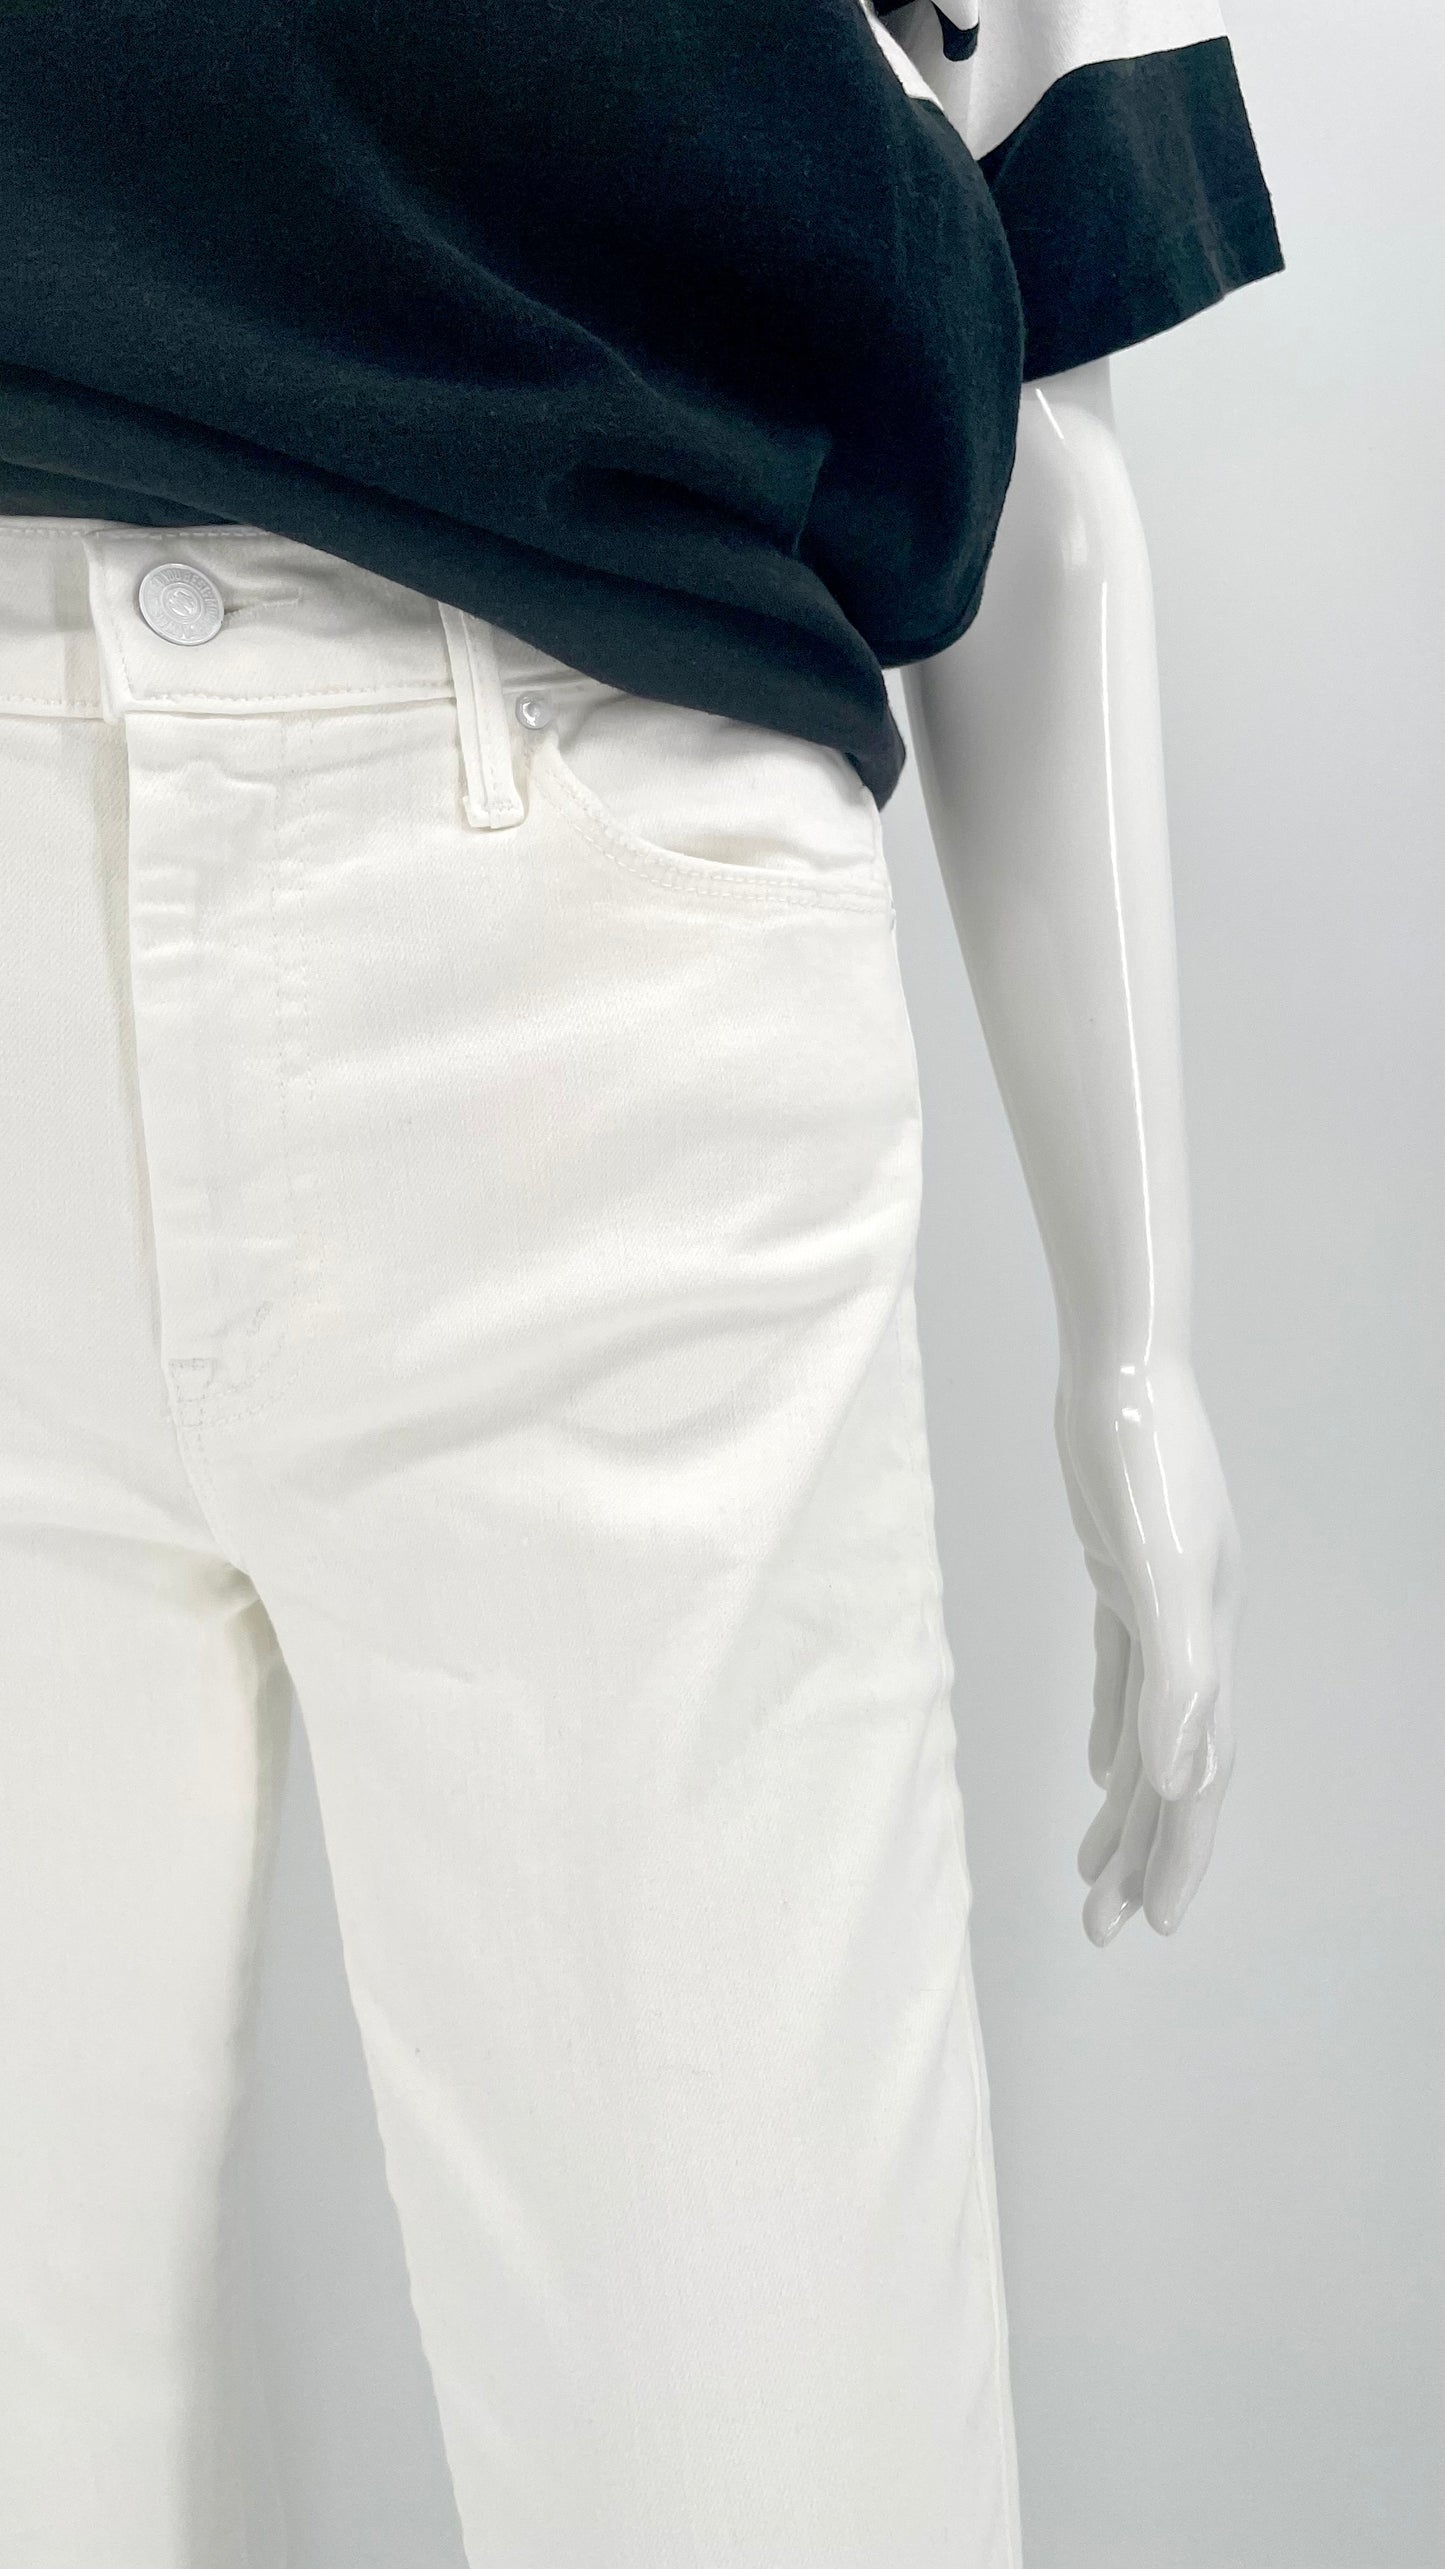 Pre-Loved MOTHER denim white flared jeans NWOT - Size 29 x 32